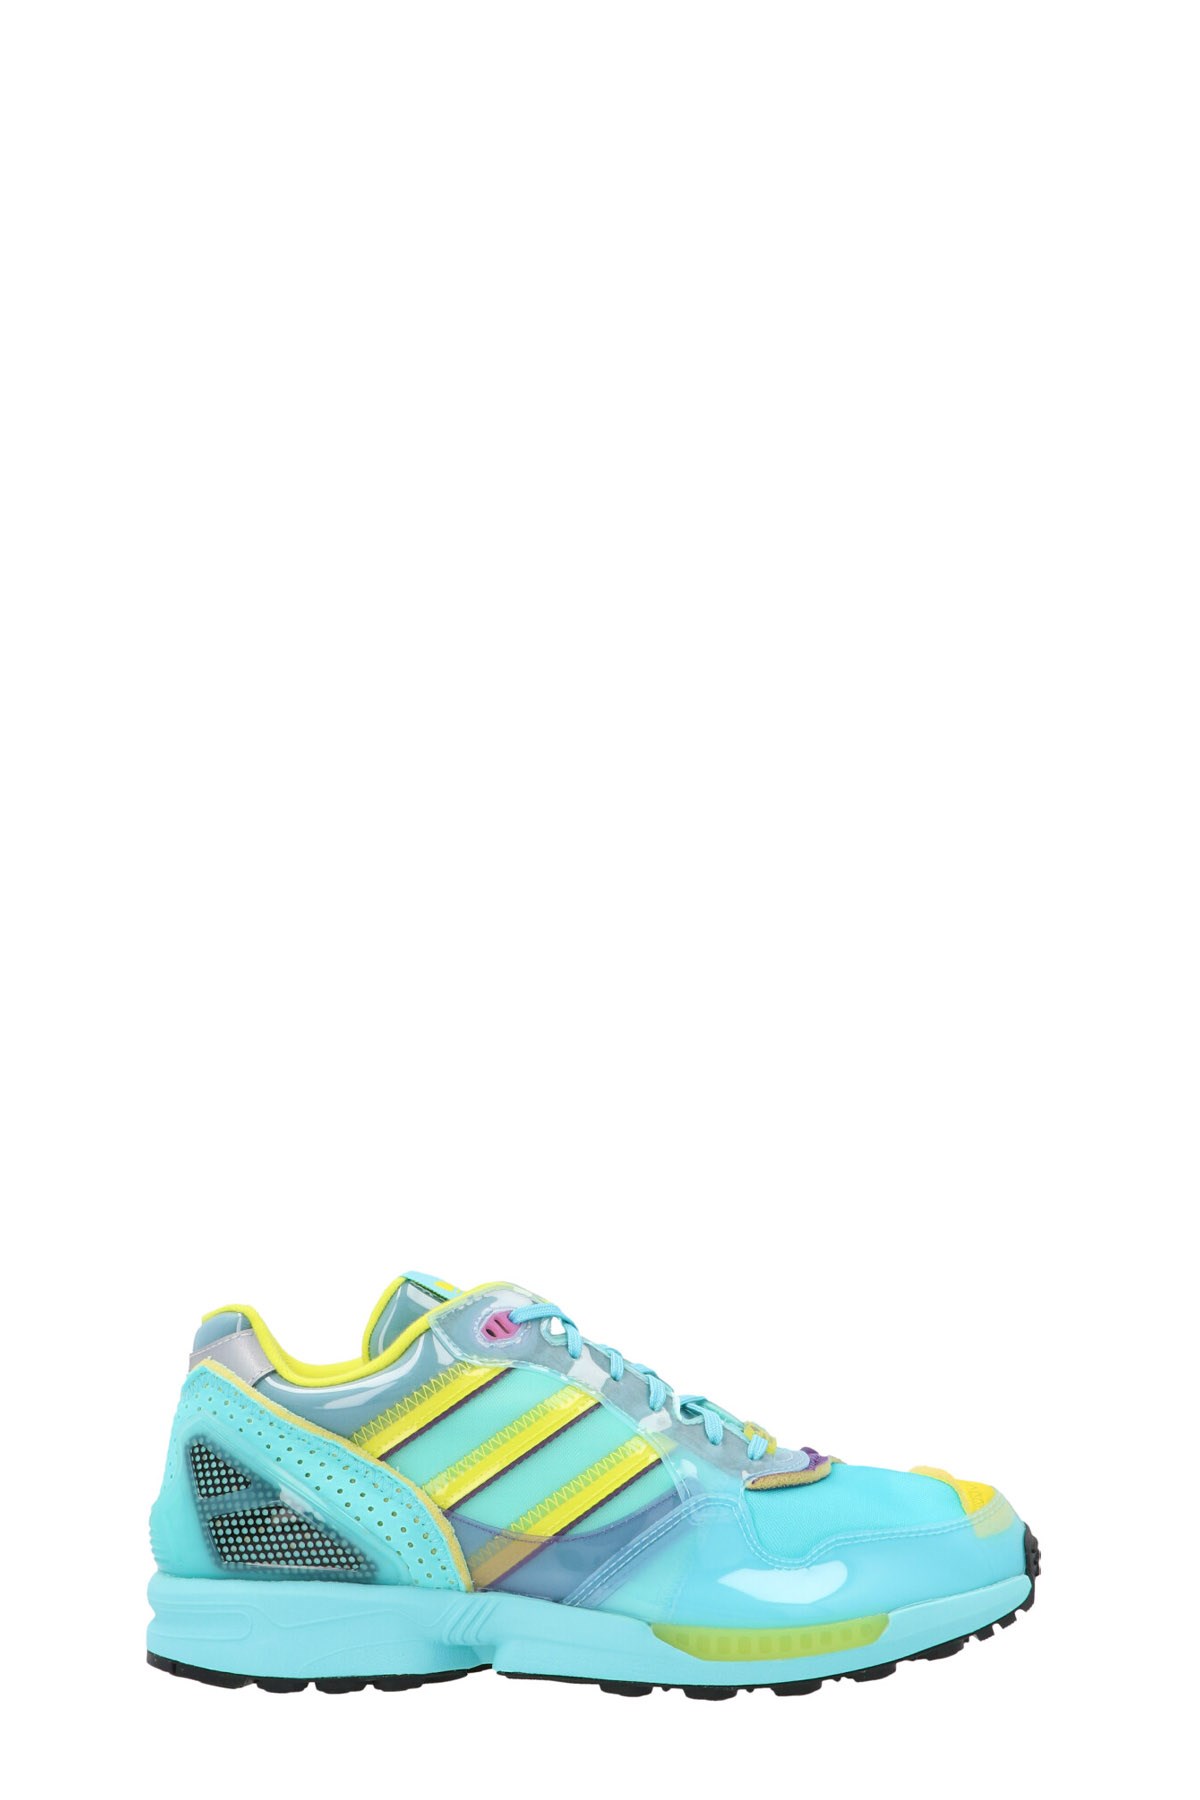 ADIDAS STATEMENT Xz 0006 Inside Out' Kapsel Energy Pack Sneakers '